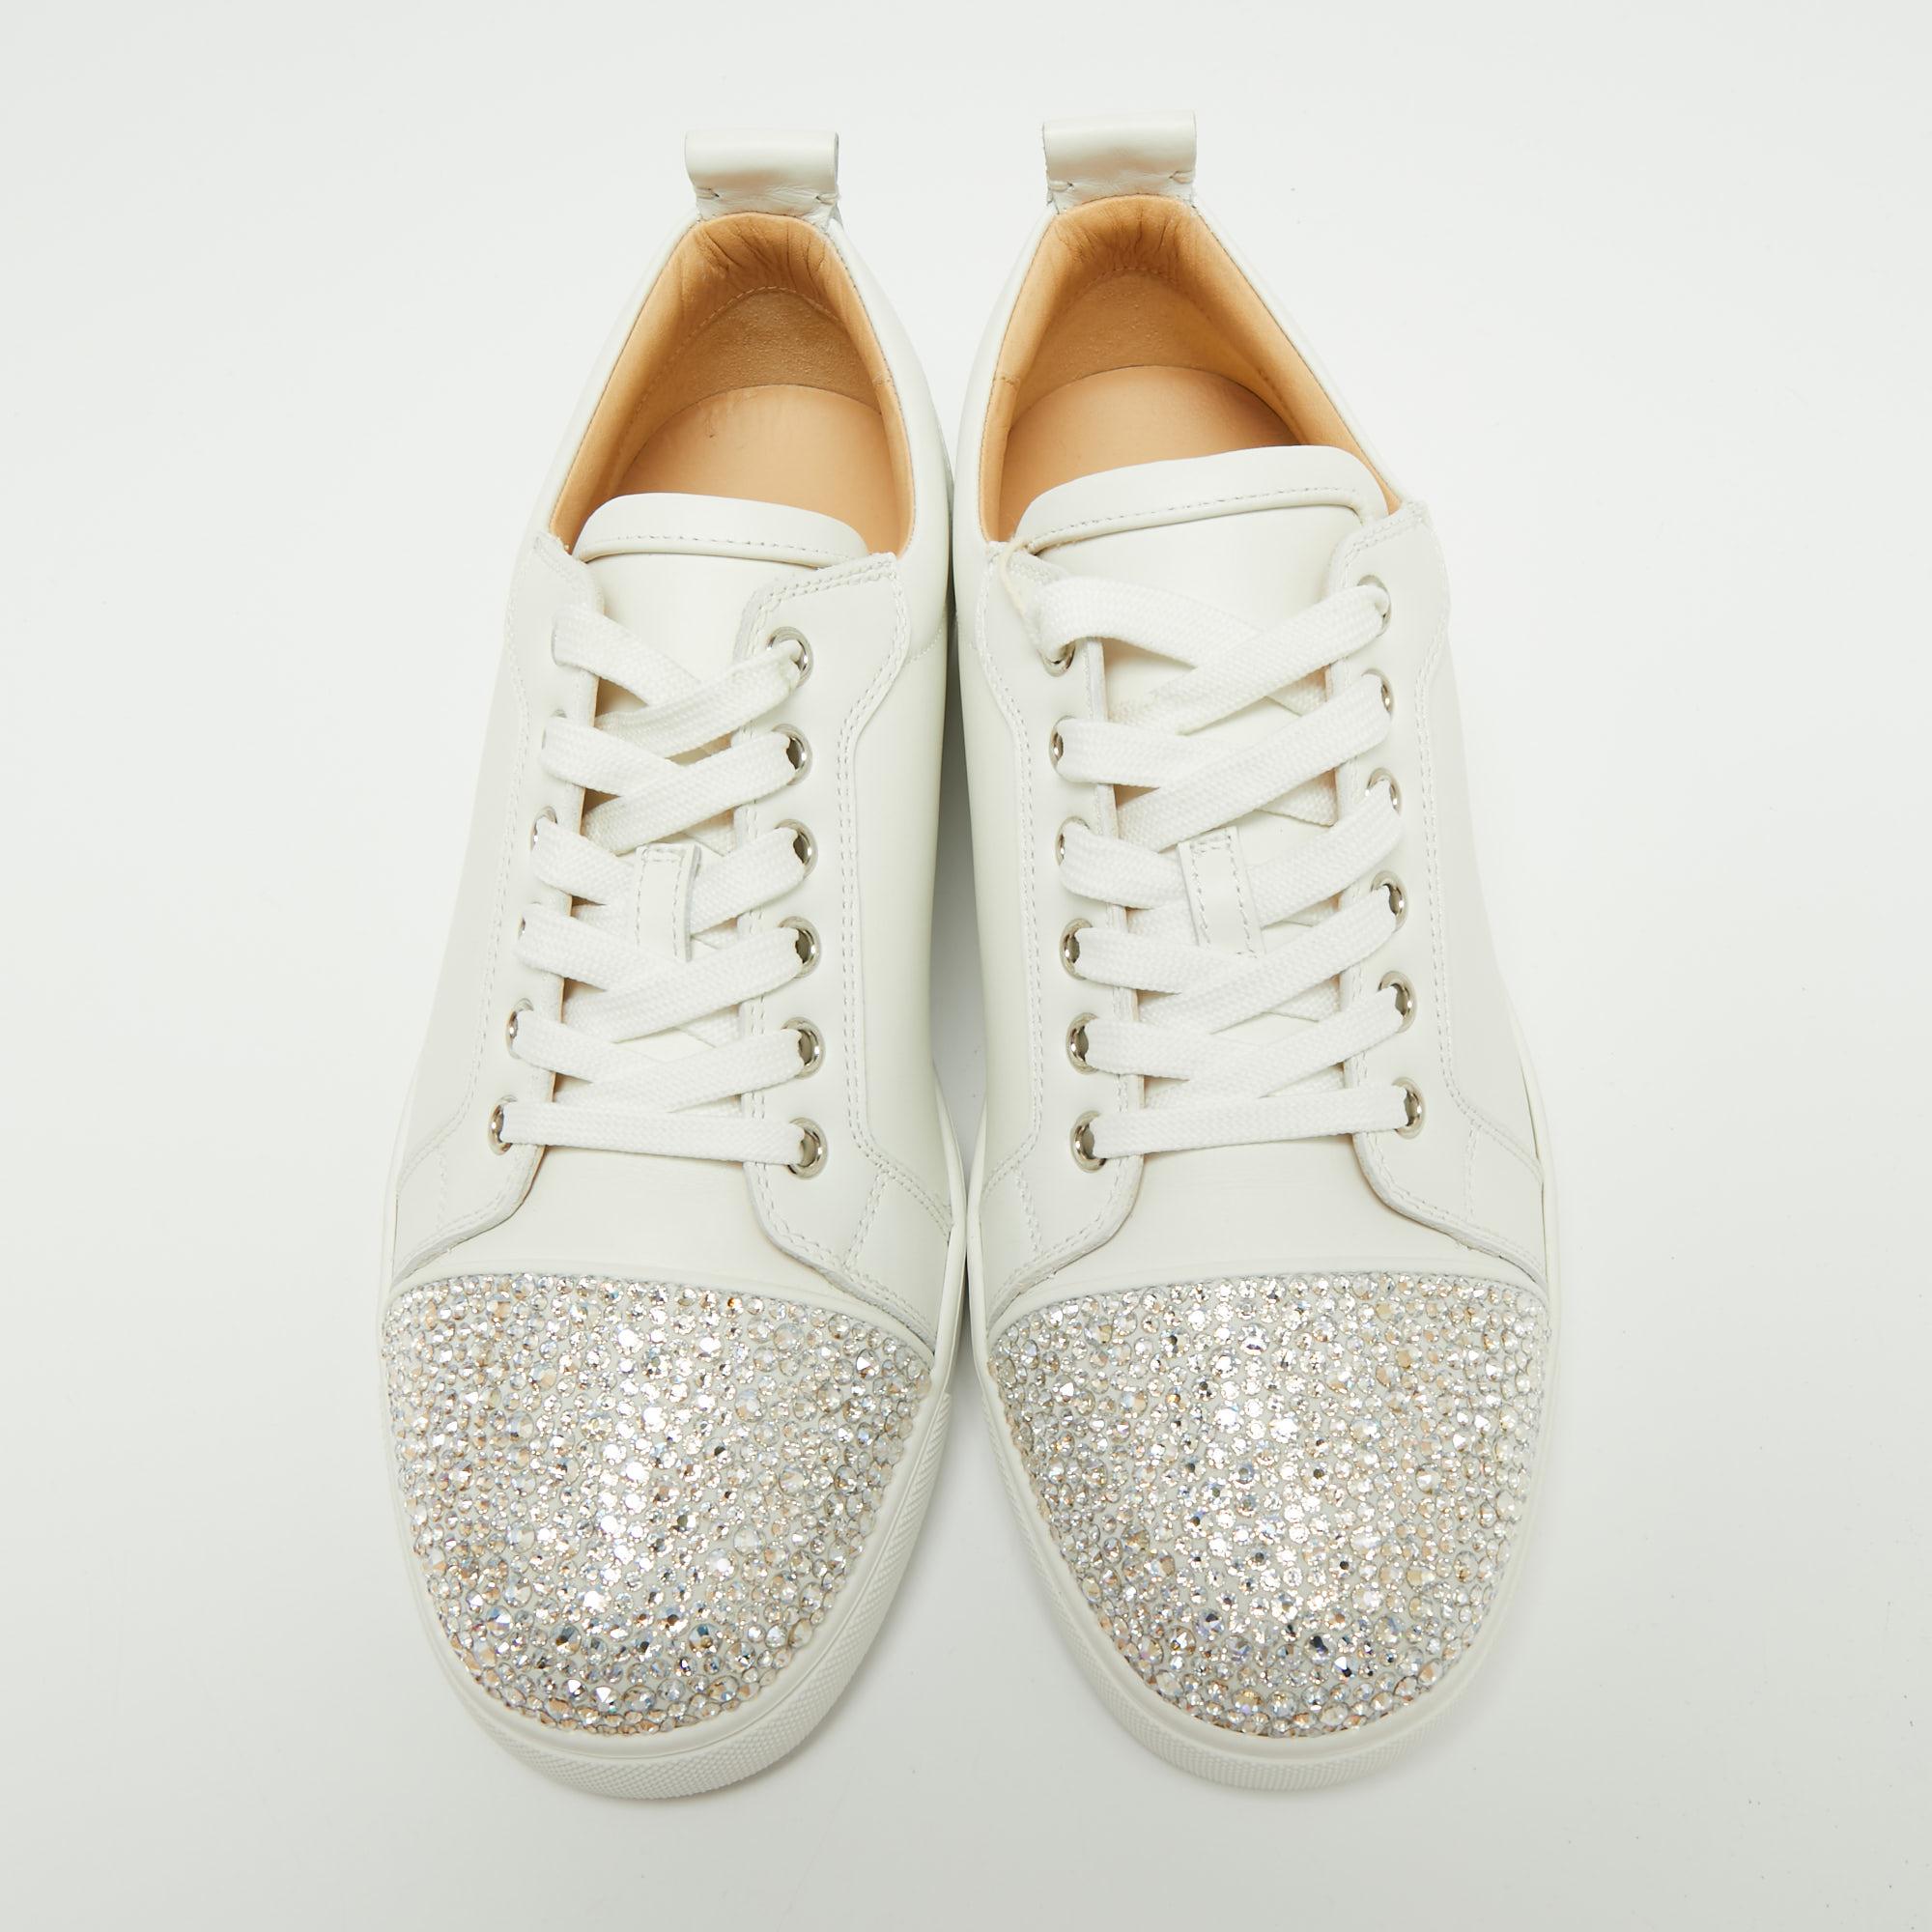 Enriched with striking elements, these Christian Louboutin sneakers have an eye-catching display. The design uses beautiful crystal embellishments on the front and a white leather exterior. The shoes are teamed with lace-up vamps, round toes, and